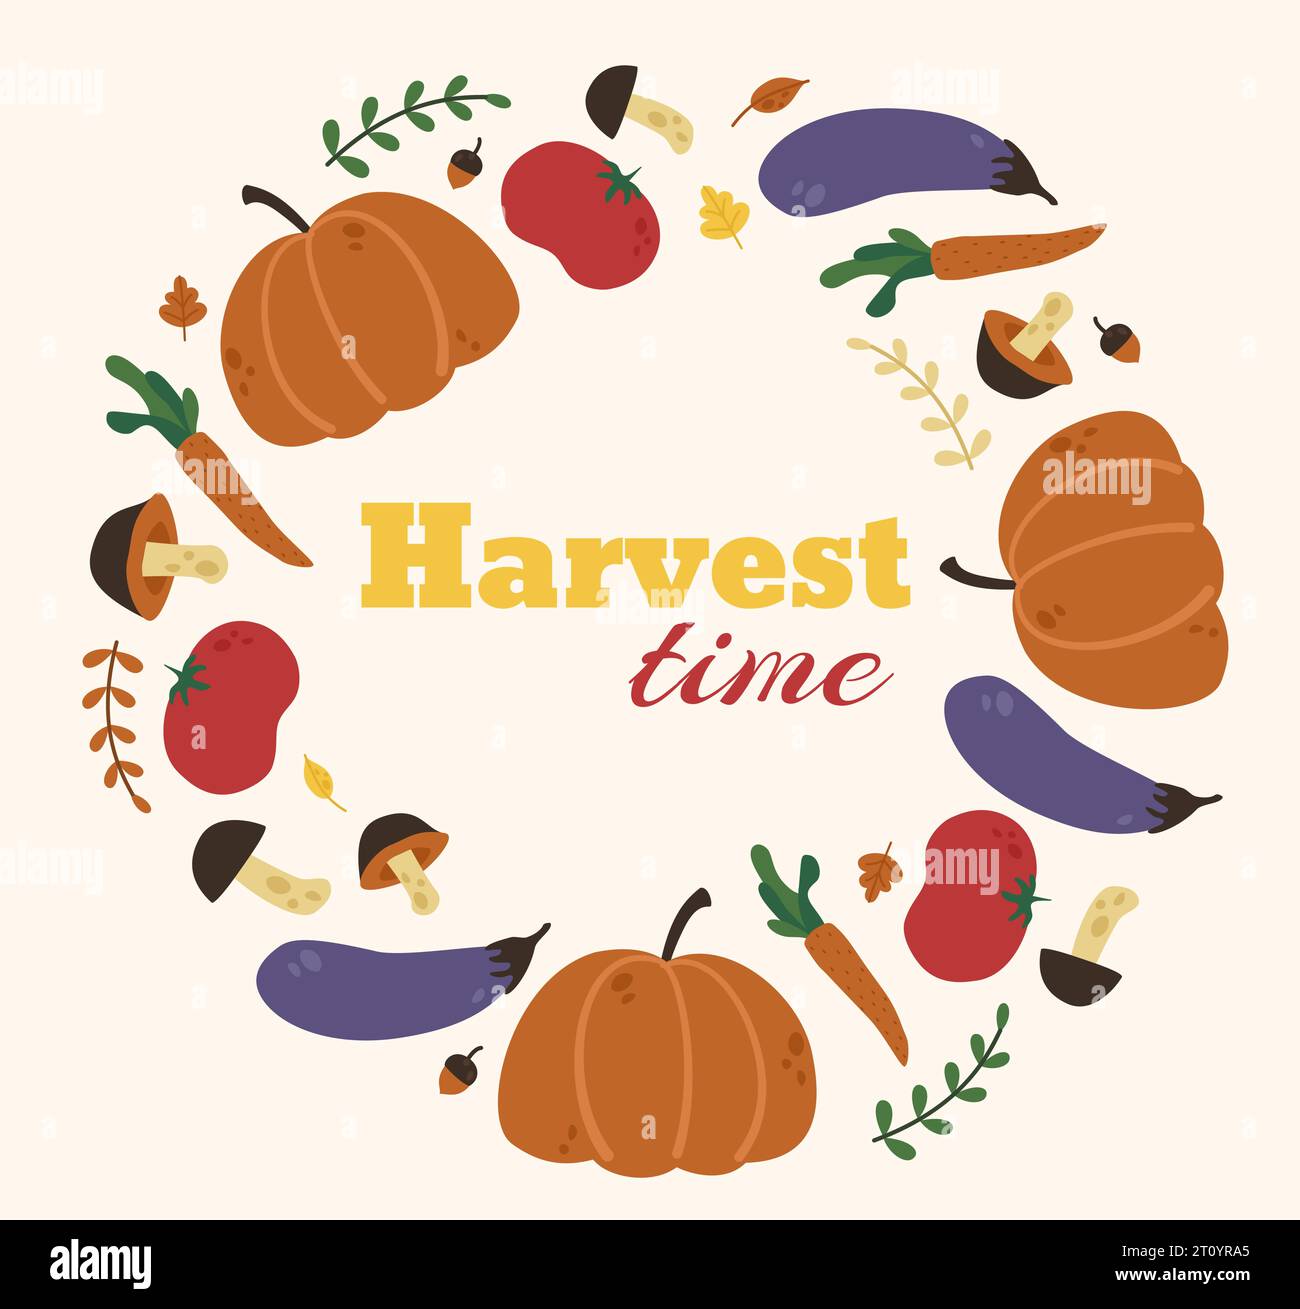 Autumn harvest festival. Vintage vector postcard. Pumpkin and mushrooms, tomato and eggplant, carrots, acorns and leaves. Elements for design. Stock Vector